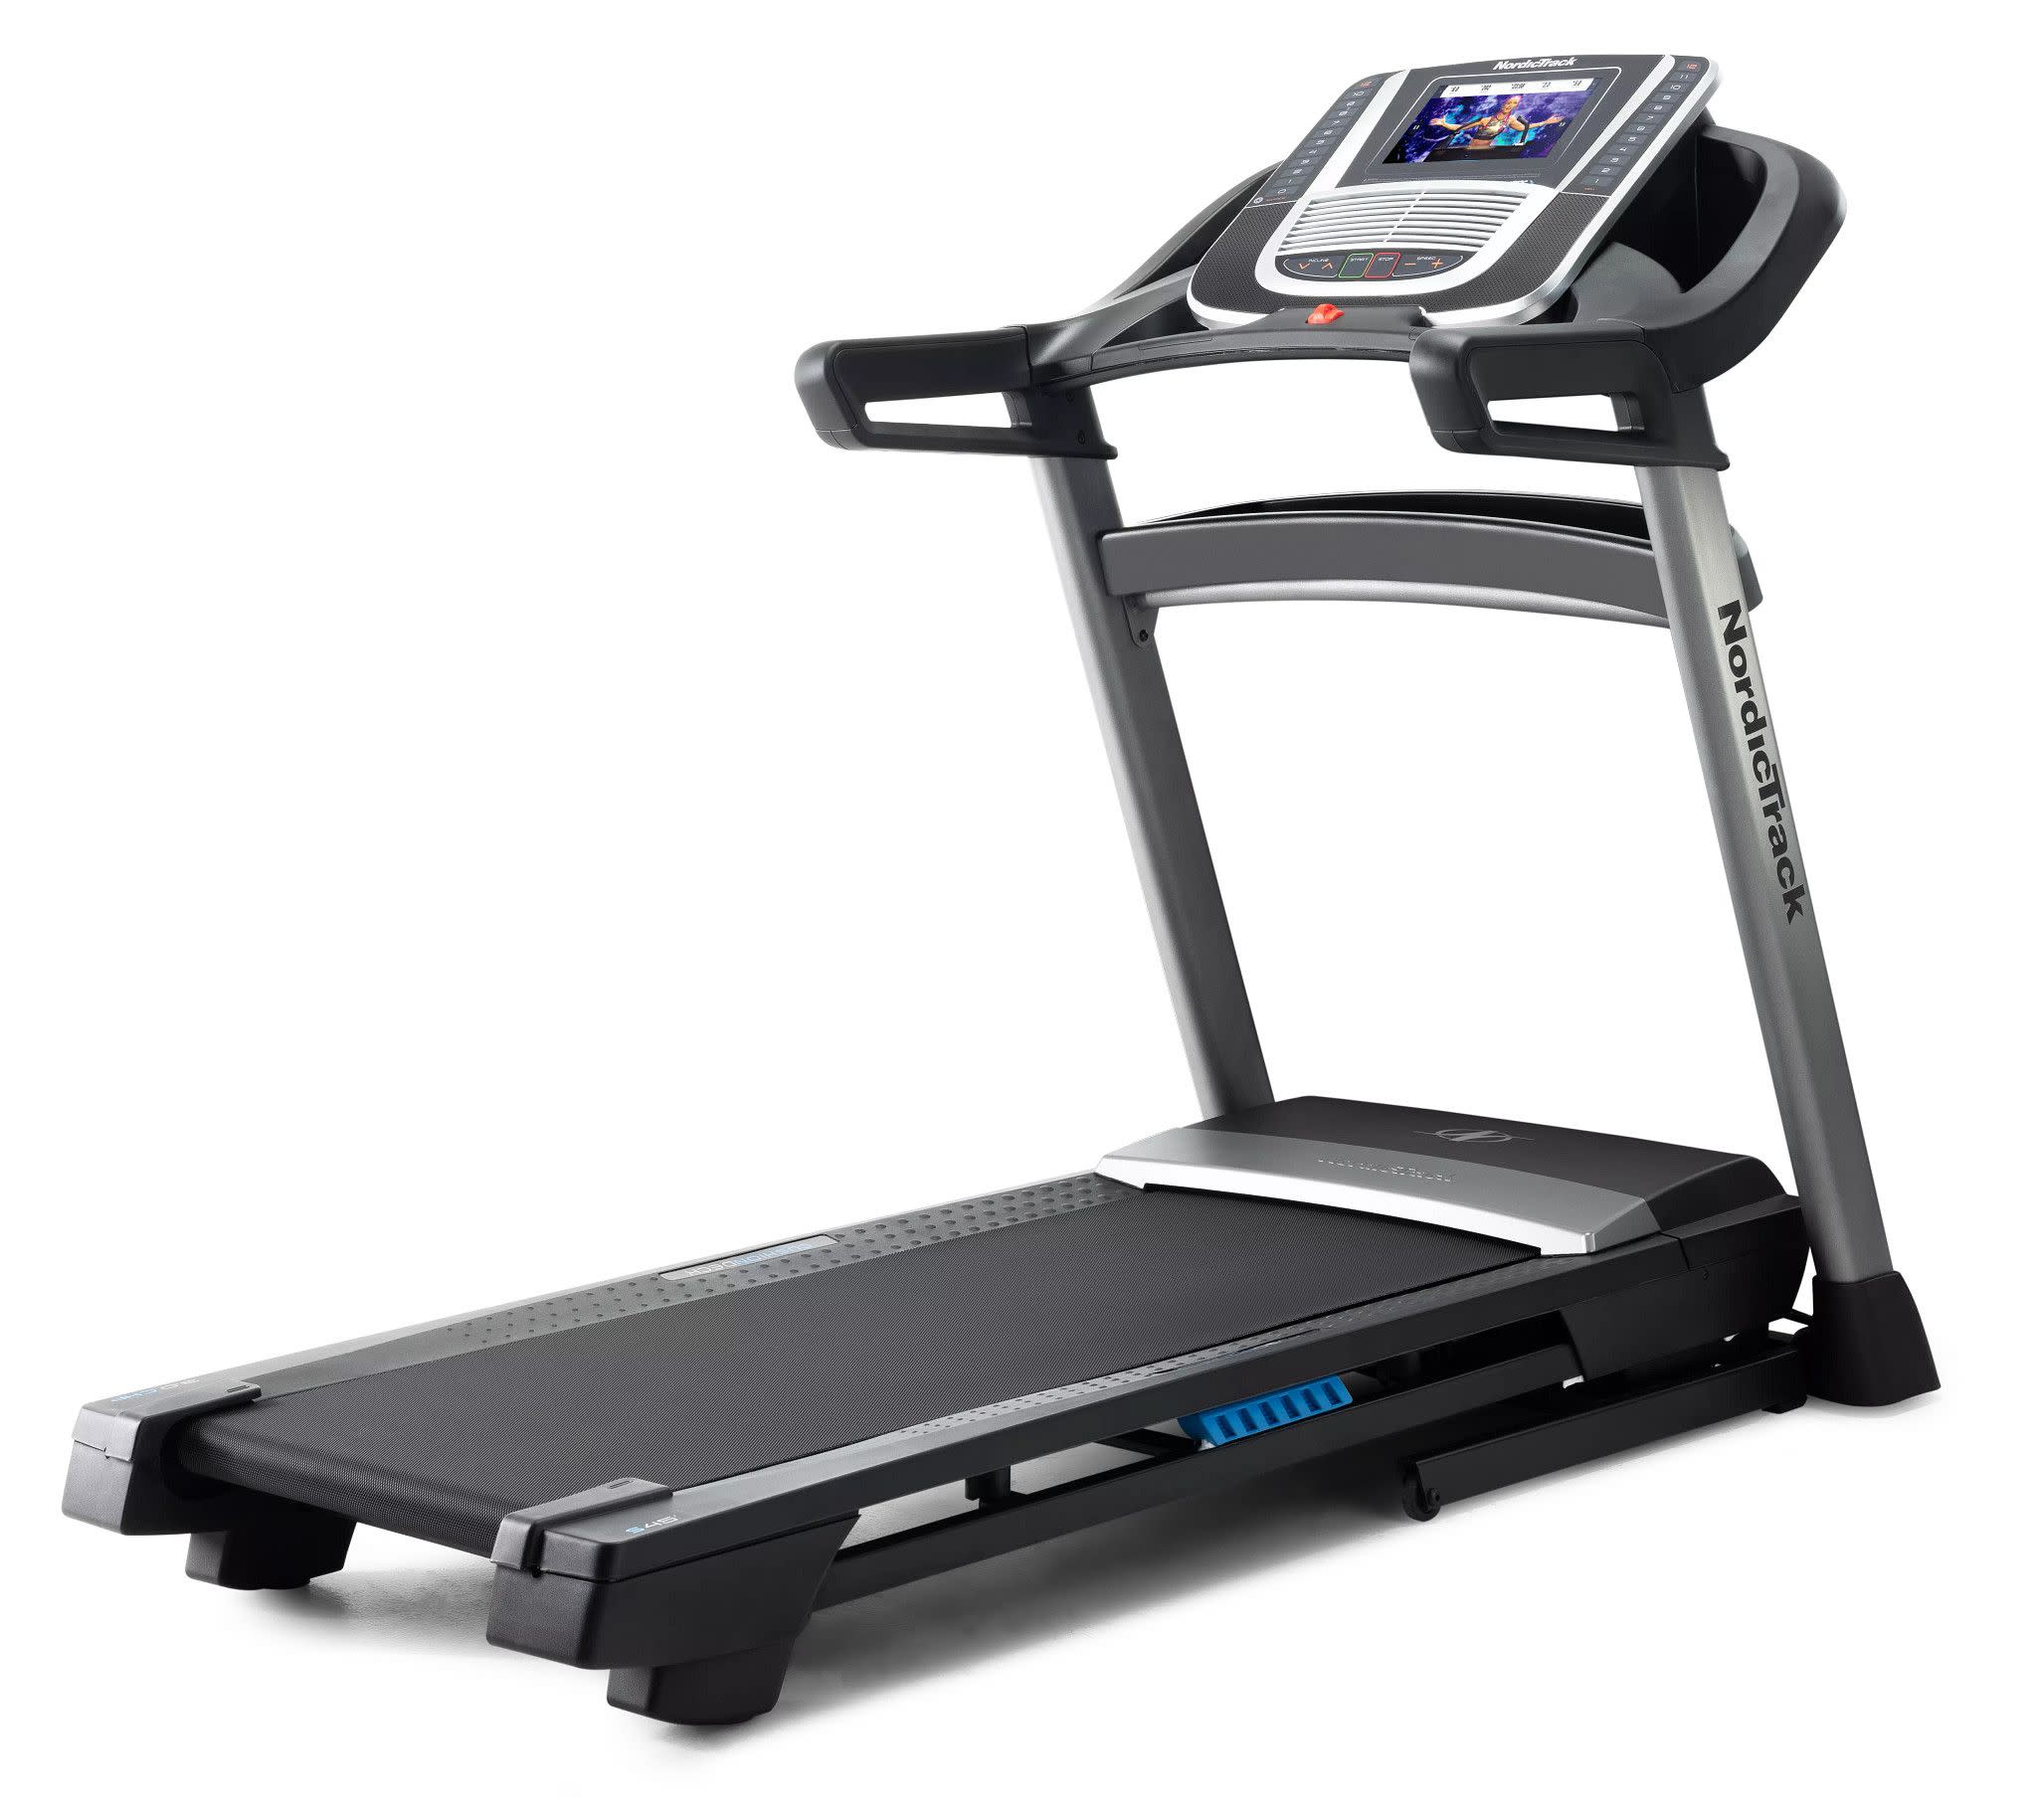 NordicTrack C 1100i Smart Treadmill with 10” Touchscreen and and 30-Day iFIT Family Membership - image 1 of 6